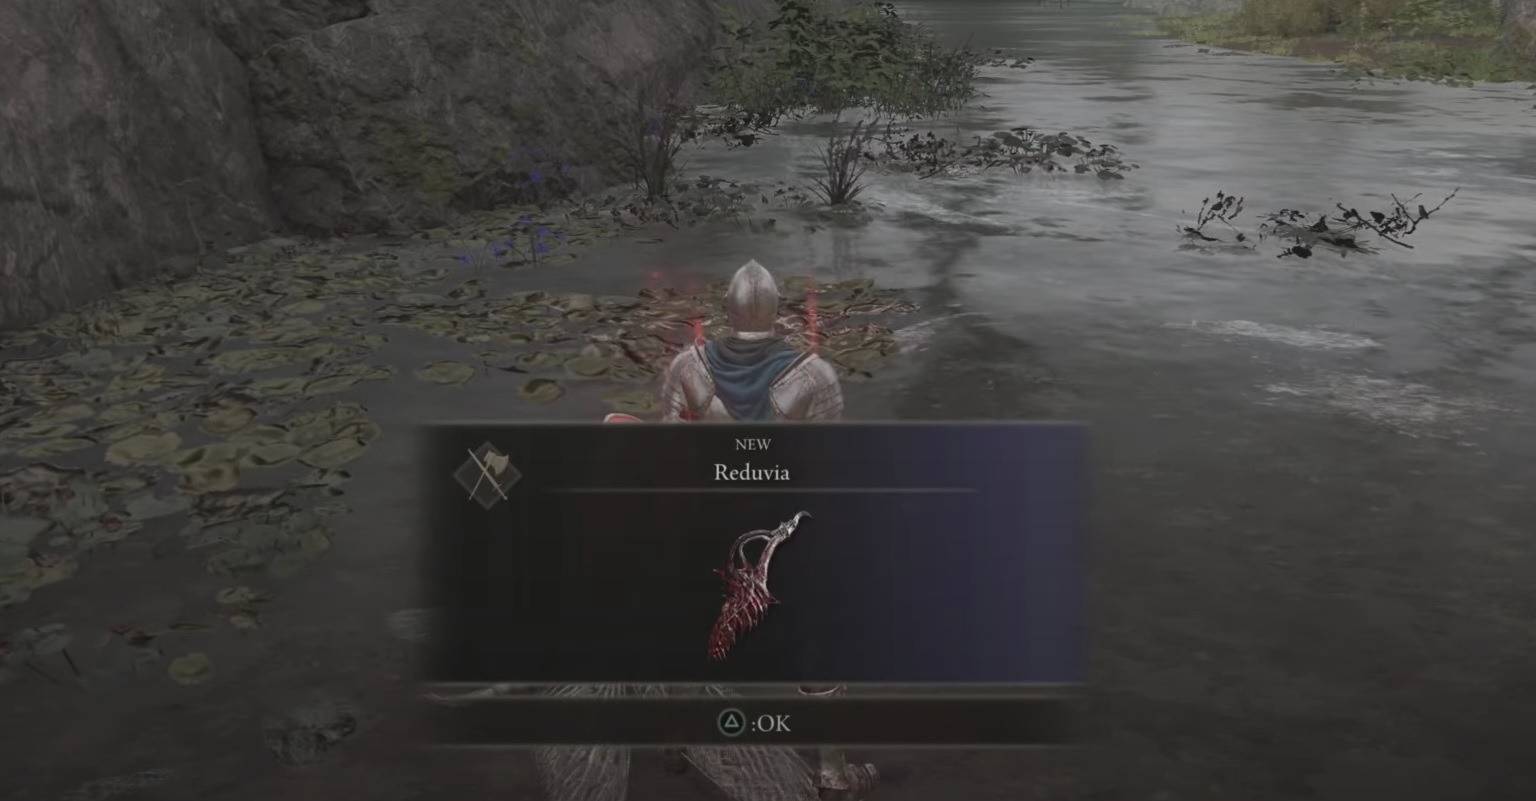 Reduvia, the best blood weapon in Elden Ring acquired.